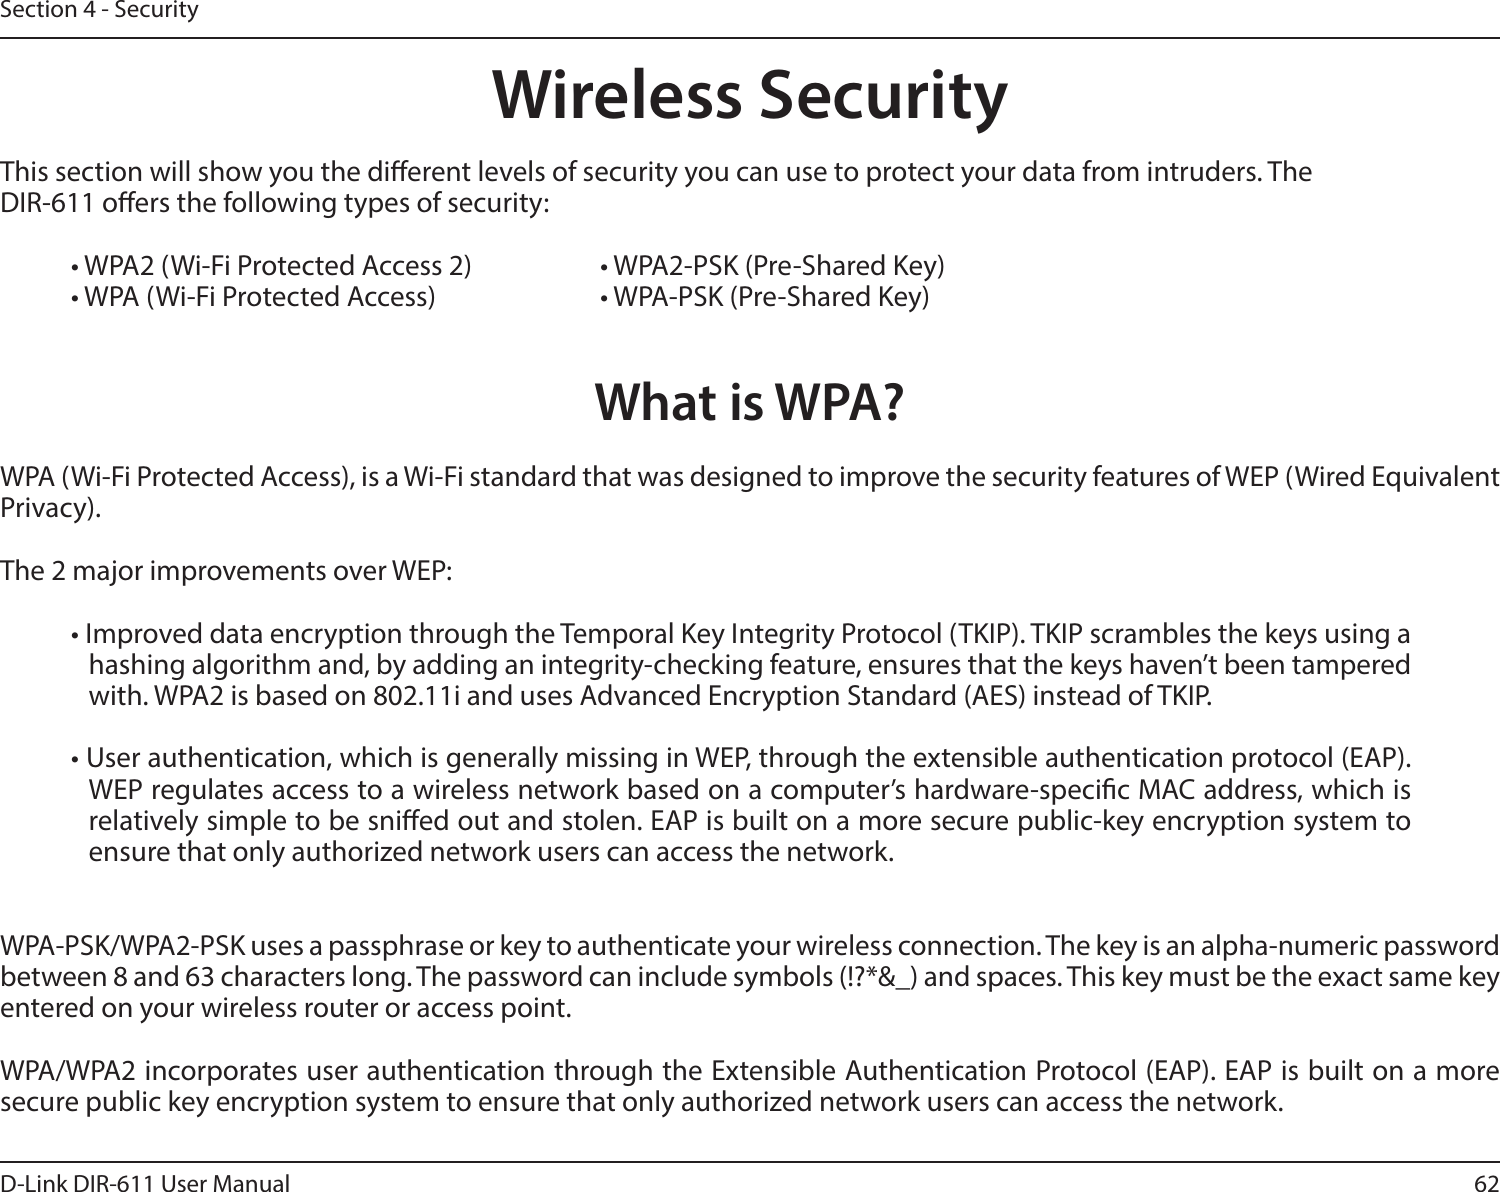 62D-Link DIR-611 User ManualSection 4 - SecurityWireless SecurityThis section will show you the dierent levels of security you can use to protect your data from intruders. The DIR-611 oers the following types of security:• WPA2 (Wi-Fi Protected Access 2)     • WPA2-PSK (Pre-Shared Key)• WPA (Wi-Fi Protected Access)      • WPA-PSK (Pre-Shared Key)What is WPA?WPA (Wi-Fi Protected Access), is a Wi-Fi standard that was designed to improve the security features of WEP (Wired Equivalent Privacy).  The 2 major improvements over WEP: • Improved data encryption through the Temporal Key Integrity Protocol (TKIP). TKIP scrambles the keys using a hashing algorithm and, by adding an integrity-checking feature, ensures that the keys haven’t been tampered with. WPA2 is based on 802.11i and uses Advanced Encryption Standard (AES) instead of TKIP.• User authentication, which is generally missing in WEP, through the extensible authentication protocol (EAP). WEP regulates access to a wireless network based on a computer’s hardware-specic MAC address, which is relatively simple to be snied out and stolen. EAP is built on a more secure public-key encryption system to ensure that only authorized network users can access the network.WPA-PSK/WPA2-PSK uses a passphrase or key to authenticate your wireless connection. The key is an alpha-numeric password between 8 and 63 characters long. The password can include symbols (!?*&amp;_) and spaces. This key must be the exact same key entered on your wireless router or access point.WPA/WPA2 incorporates user authentication through the Extensible Authentication Protocol (EAP). EAP is built on a more secure public key encryption system to ensure that only authorized network users can access the network.